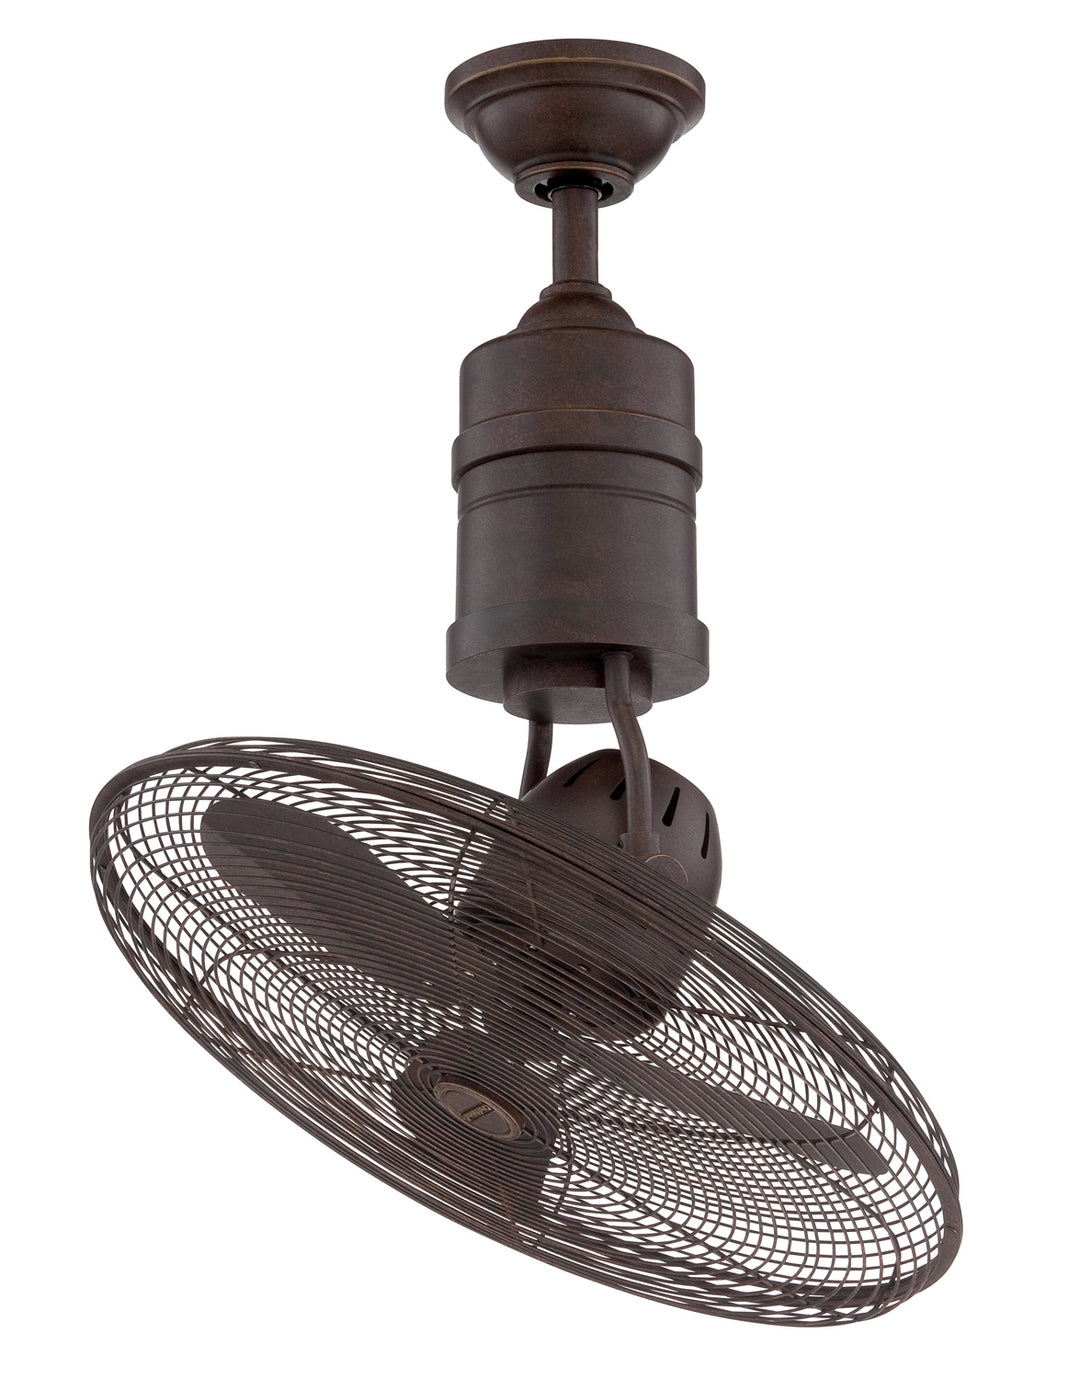 Craftmade Bellows III 21" Rotating Ceiling Fan with Wall Control and Remote